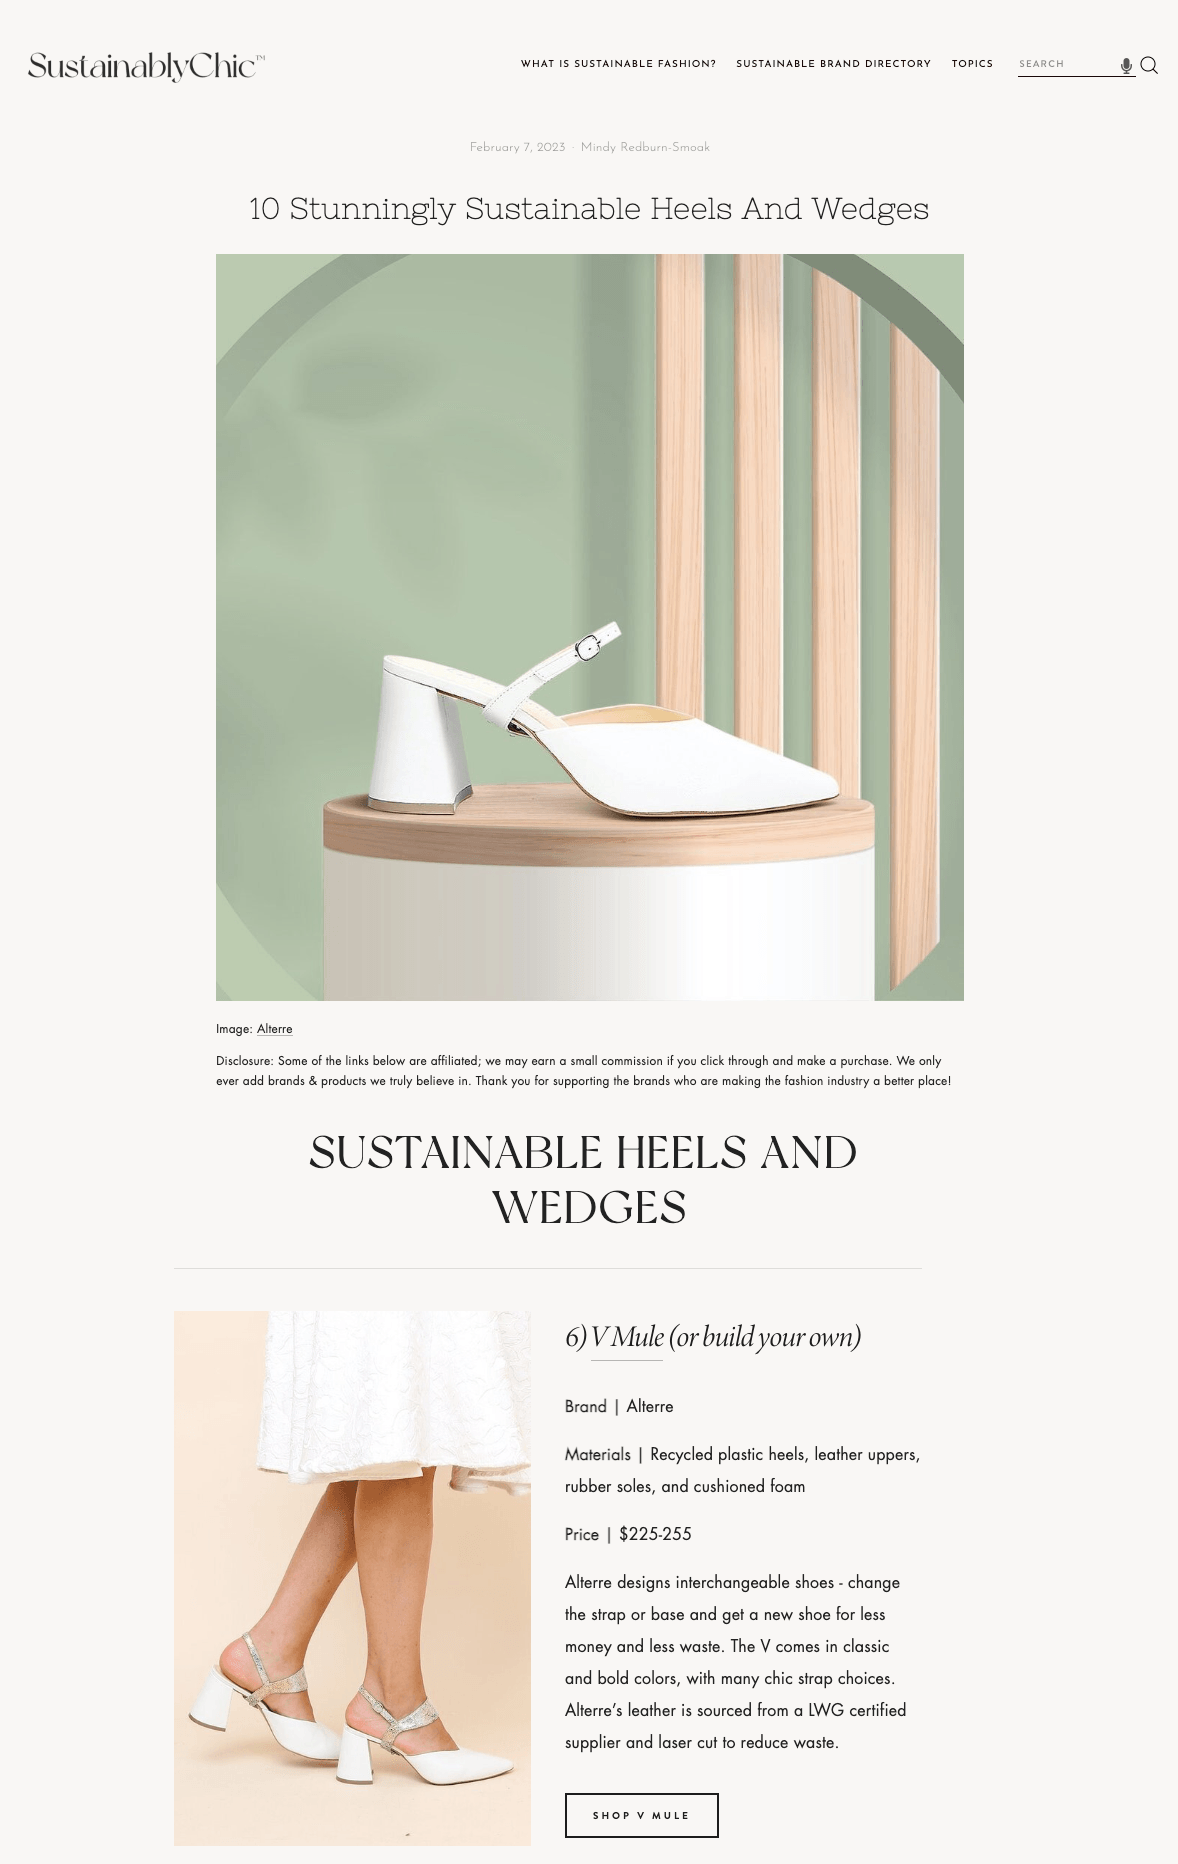 Alterre shoes featured on Sustainably Chic - Customizable Bridal Shoes